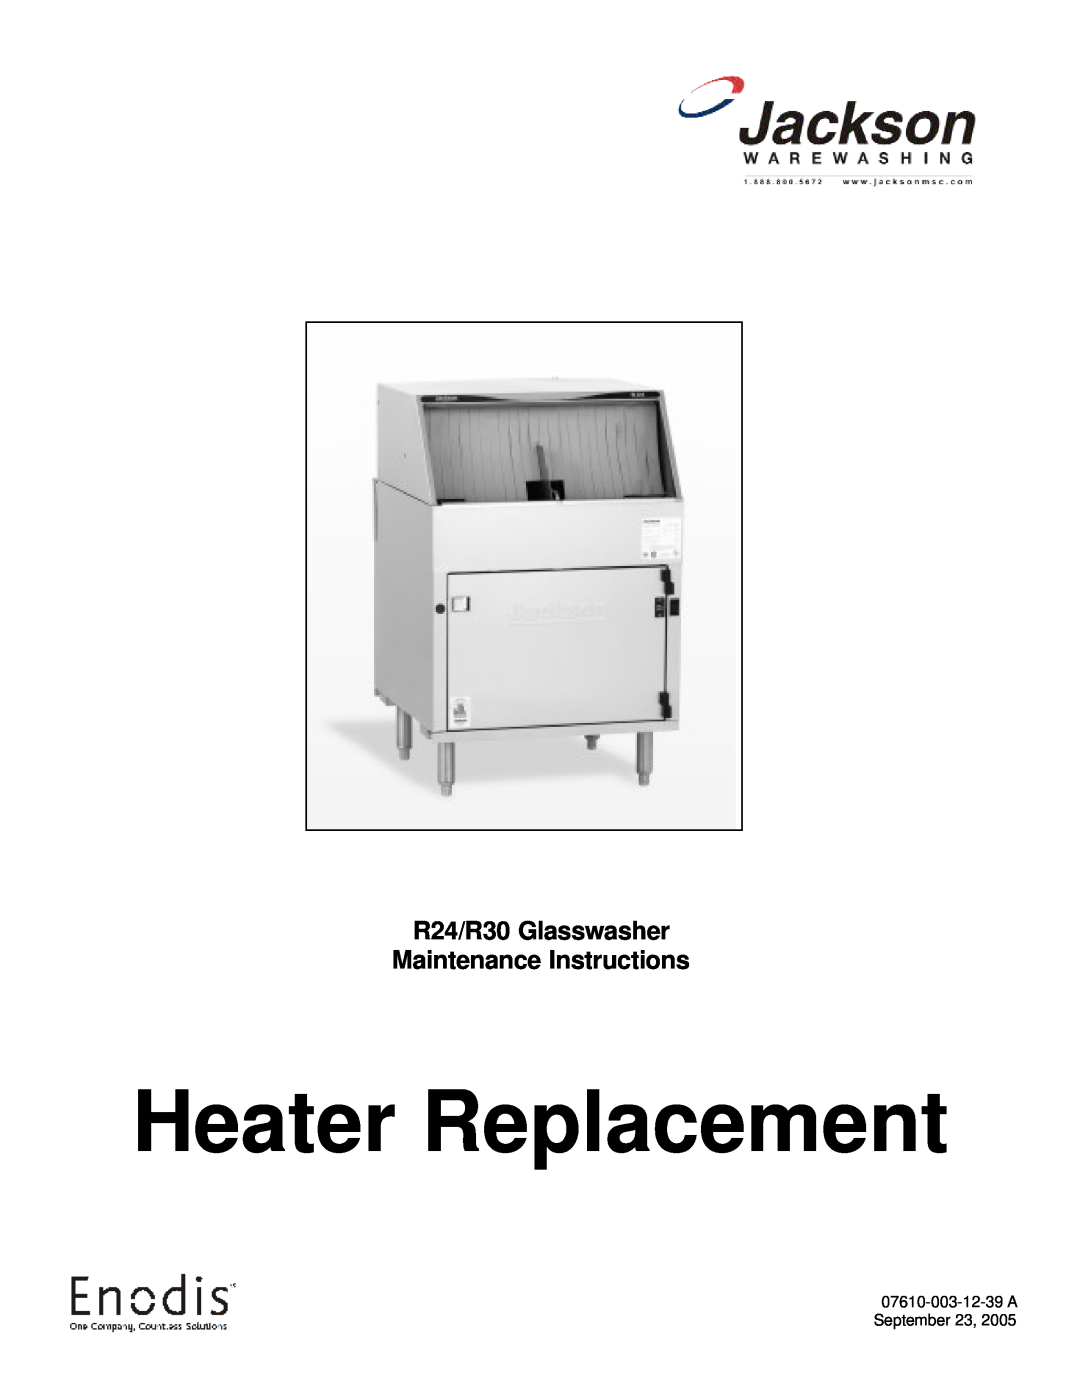 Jackson manual Heater Replacement, R24/R30 Glasswasher Maintenance Instructions 